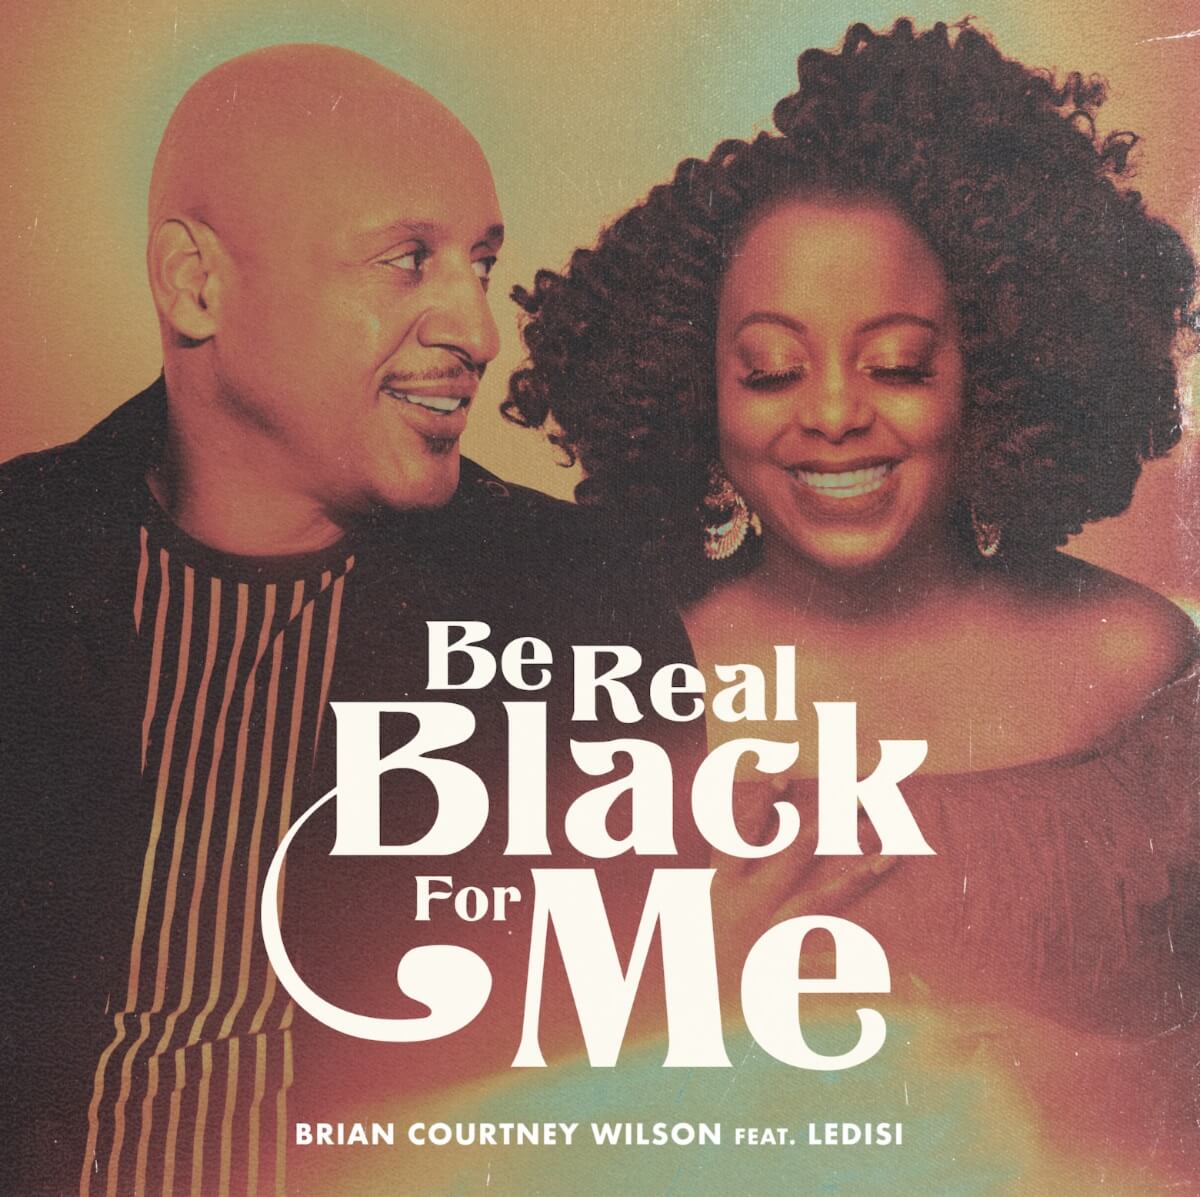 Brian Courtney Wilson X Ledisi-Be Real Black For Me